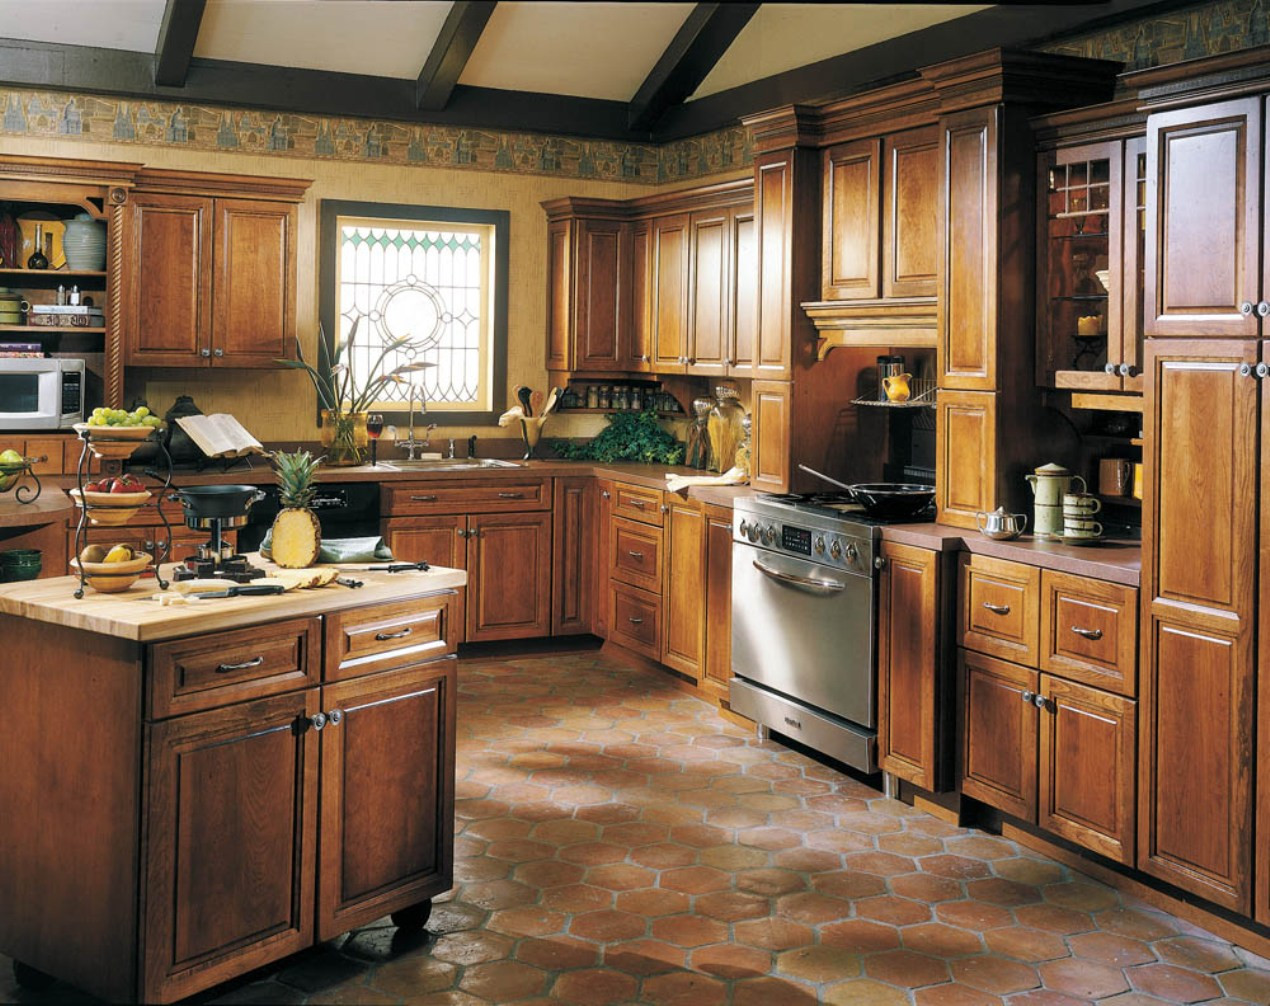 Kraftmaid Kitchen Cabinets
 How to Apply the Kraftmaid Kitchen Cabinets